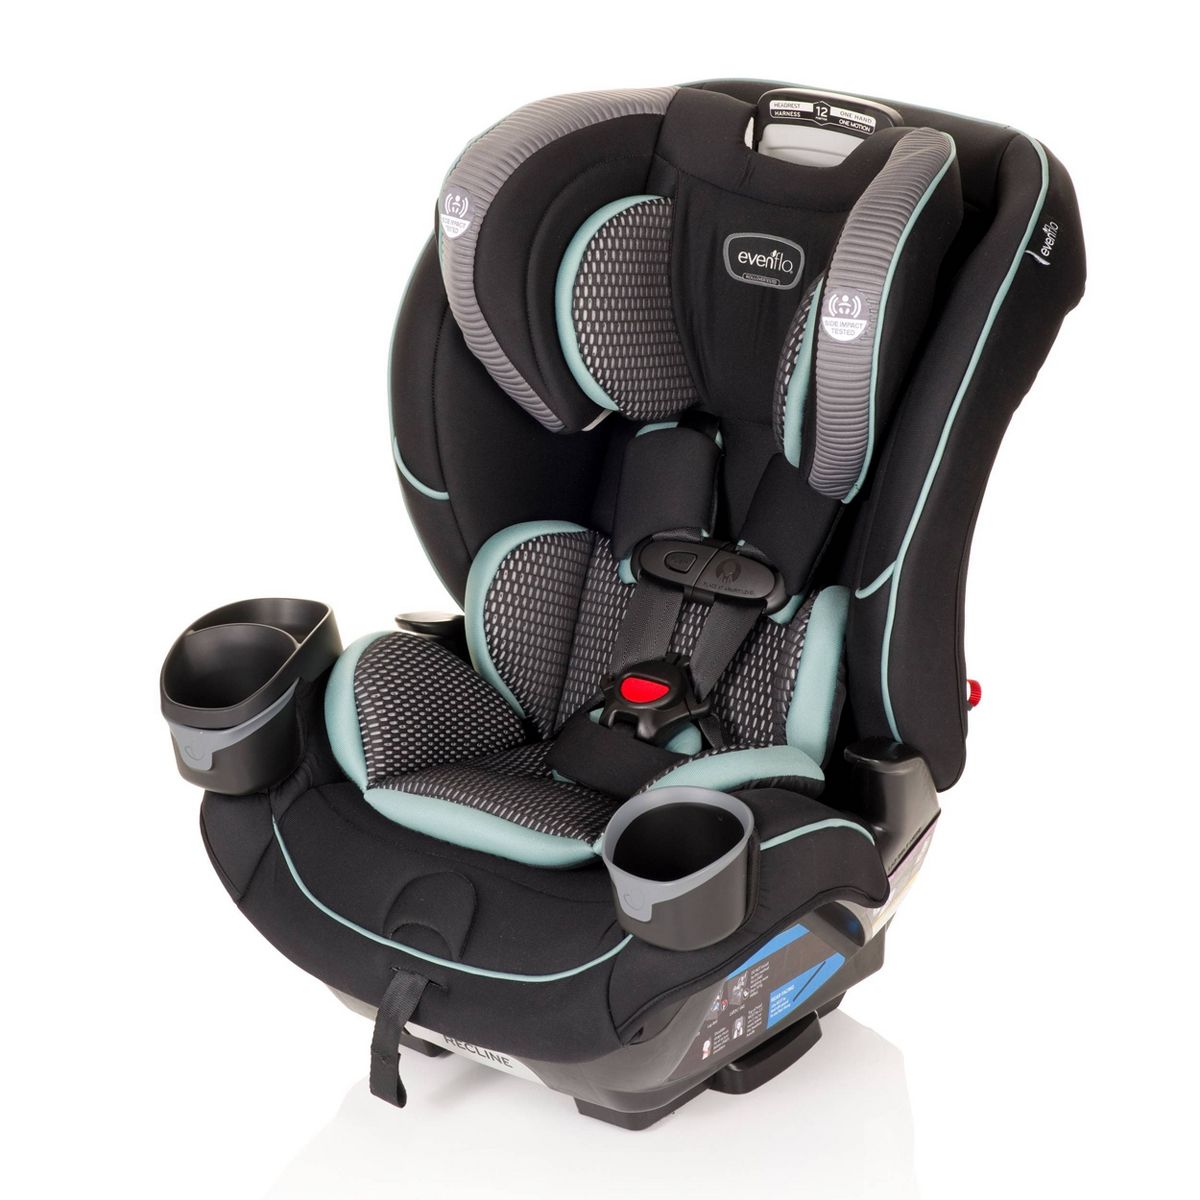 New Evenflo EveryFit 4-in-1 Convertible Car Seat - Atlas